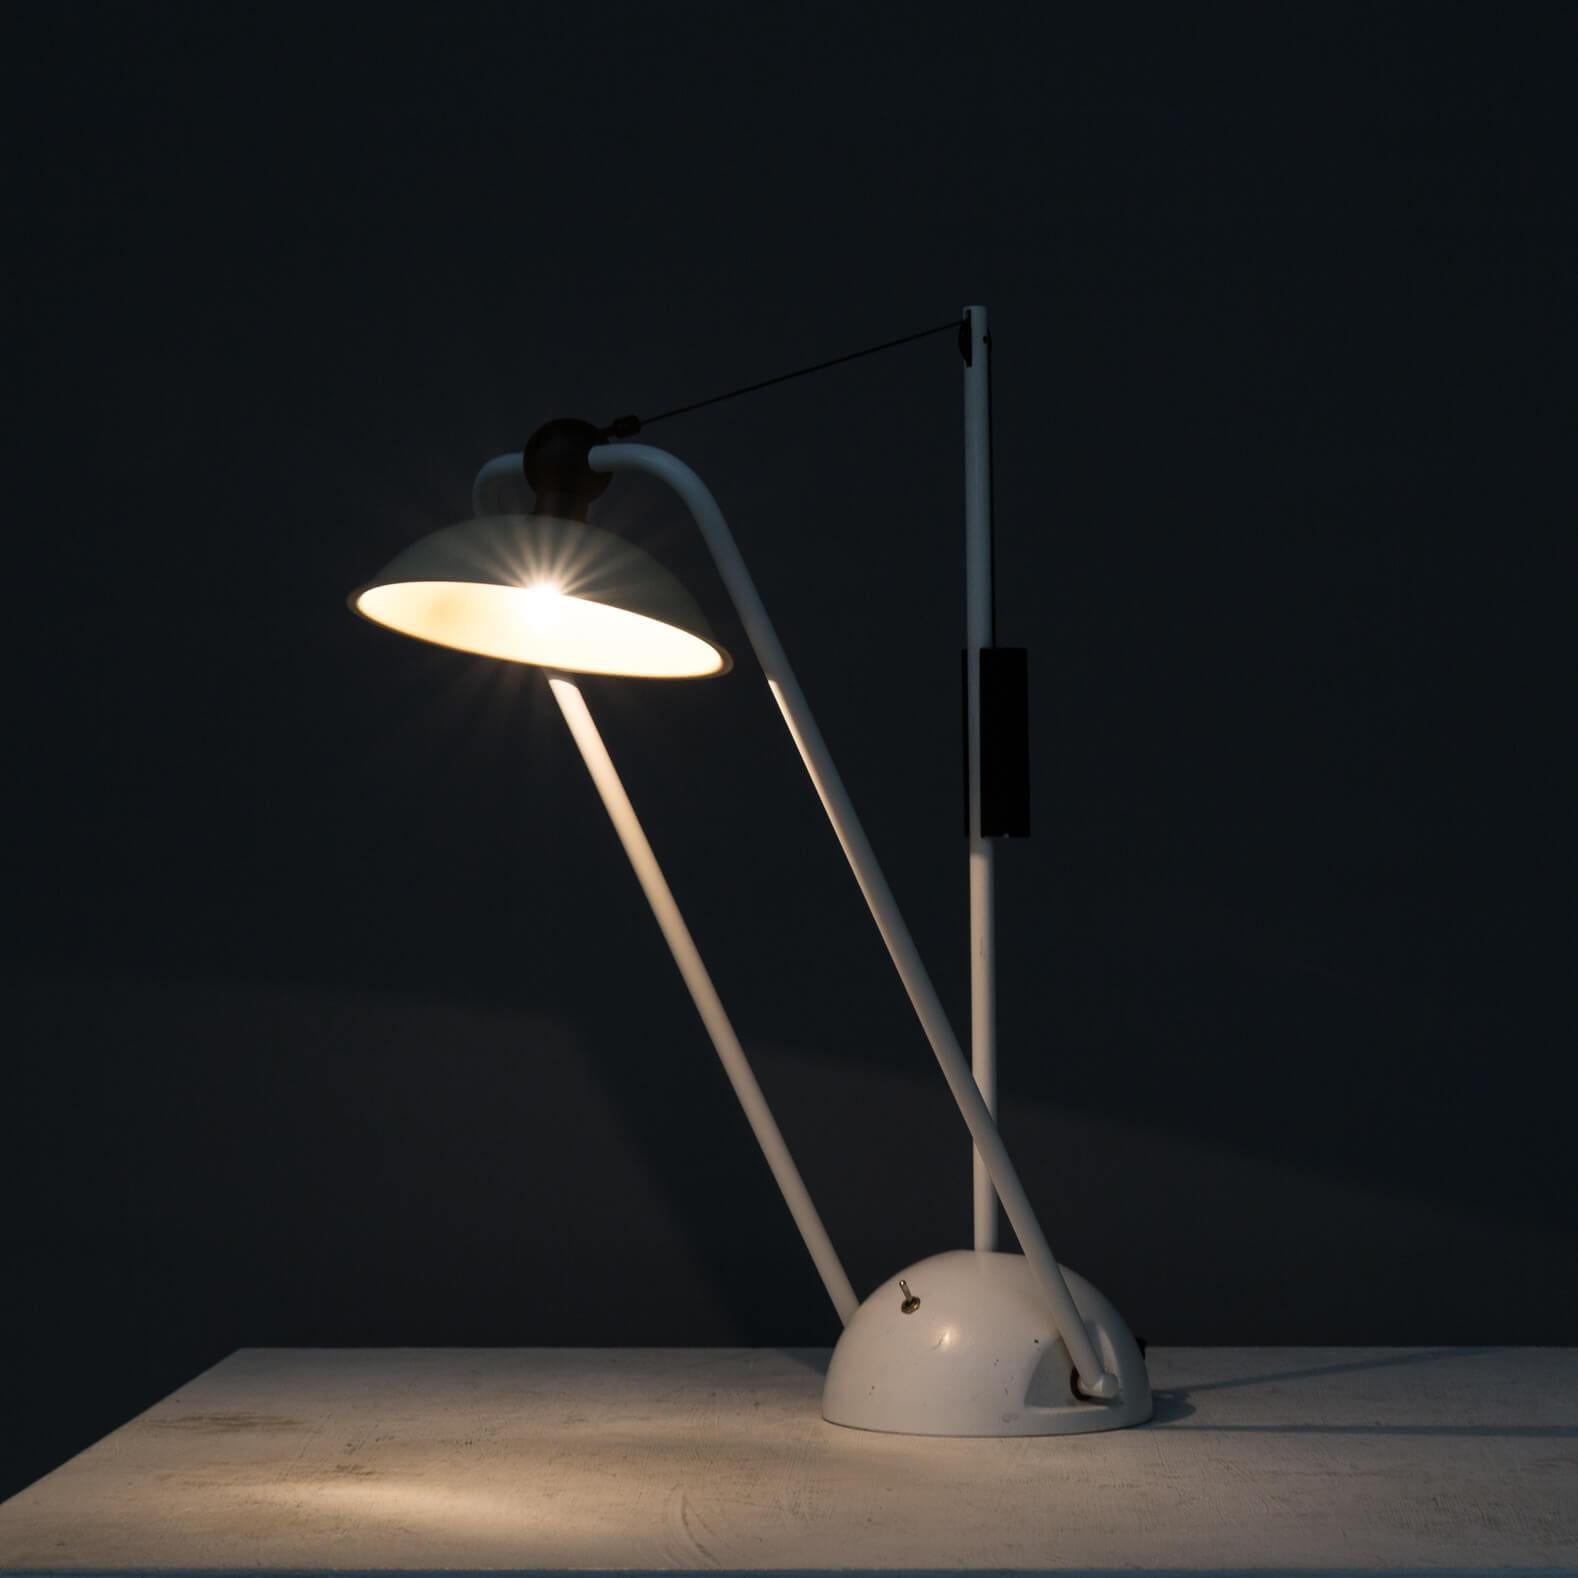 Beautiful desk lamp with counter balance repositioning frame. Very rare table lamp!